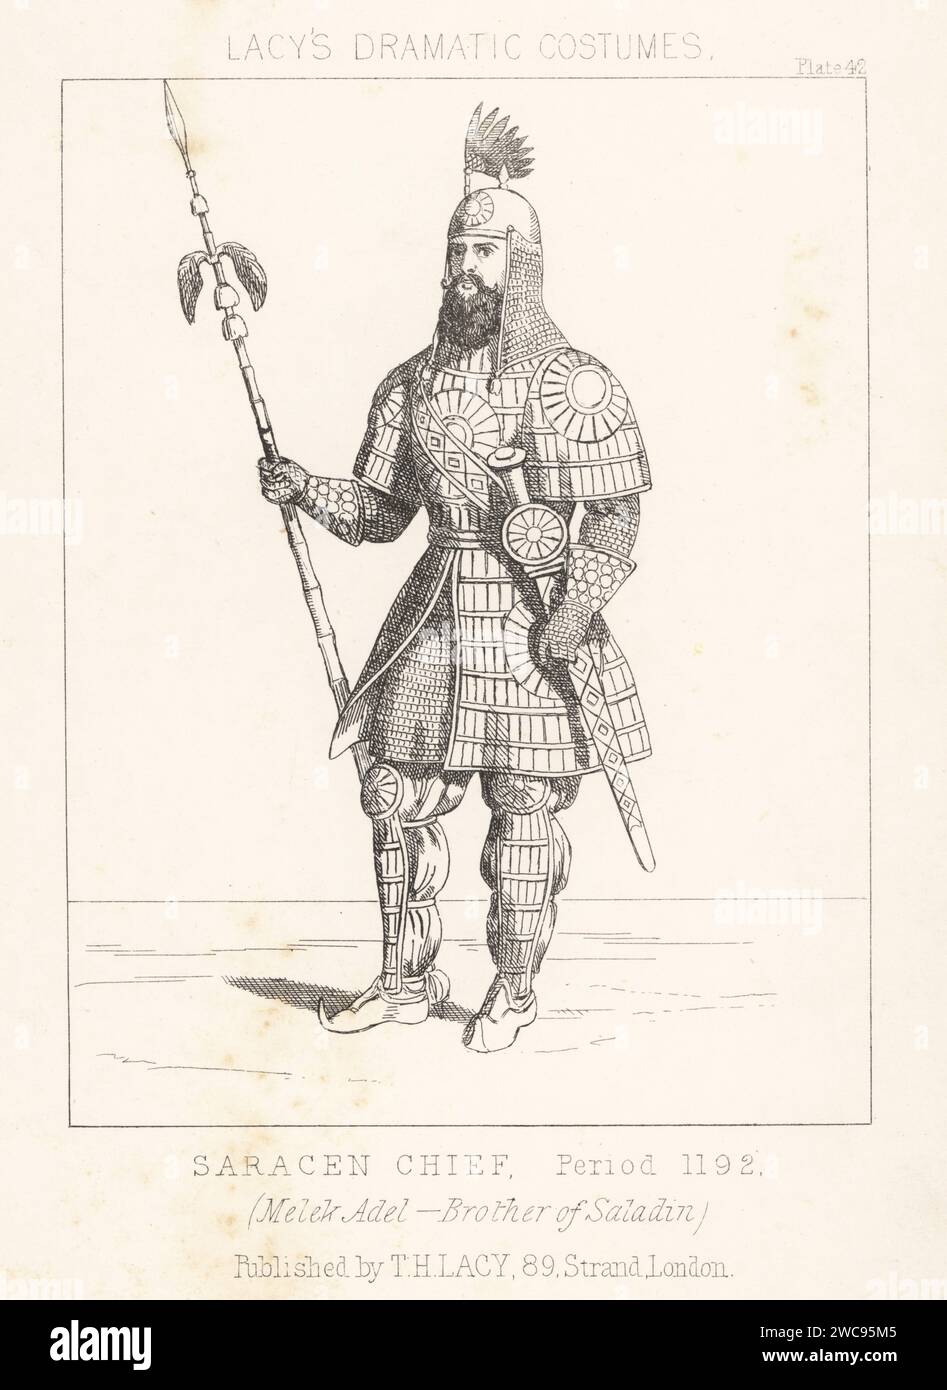 Al-Adil I, al-Malik al-Adil, or Saphadin, fourth sultan of Egypt and Syria, 1145-1218. Melek Adel, brother of Saladin. Costume of a Saracen chief, period 1192. In sallet helmet with mail aventail, scale armour over chainmail suit, with sword and winged lance. Lithograph from Thomas Hailes Lacy's Male Costumes, Historical, National and Dramatic in 200 Plates, London, 1865. Lacy (1809-1873) was a British actor, playwright, theatrical manager and publisher. Stock Photo